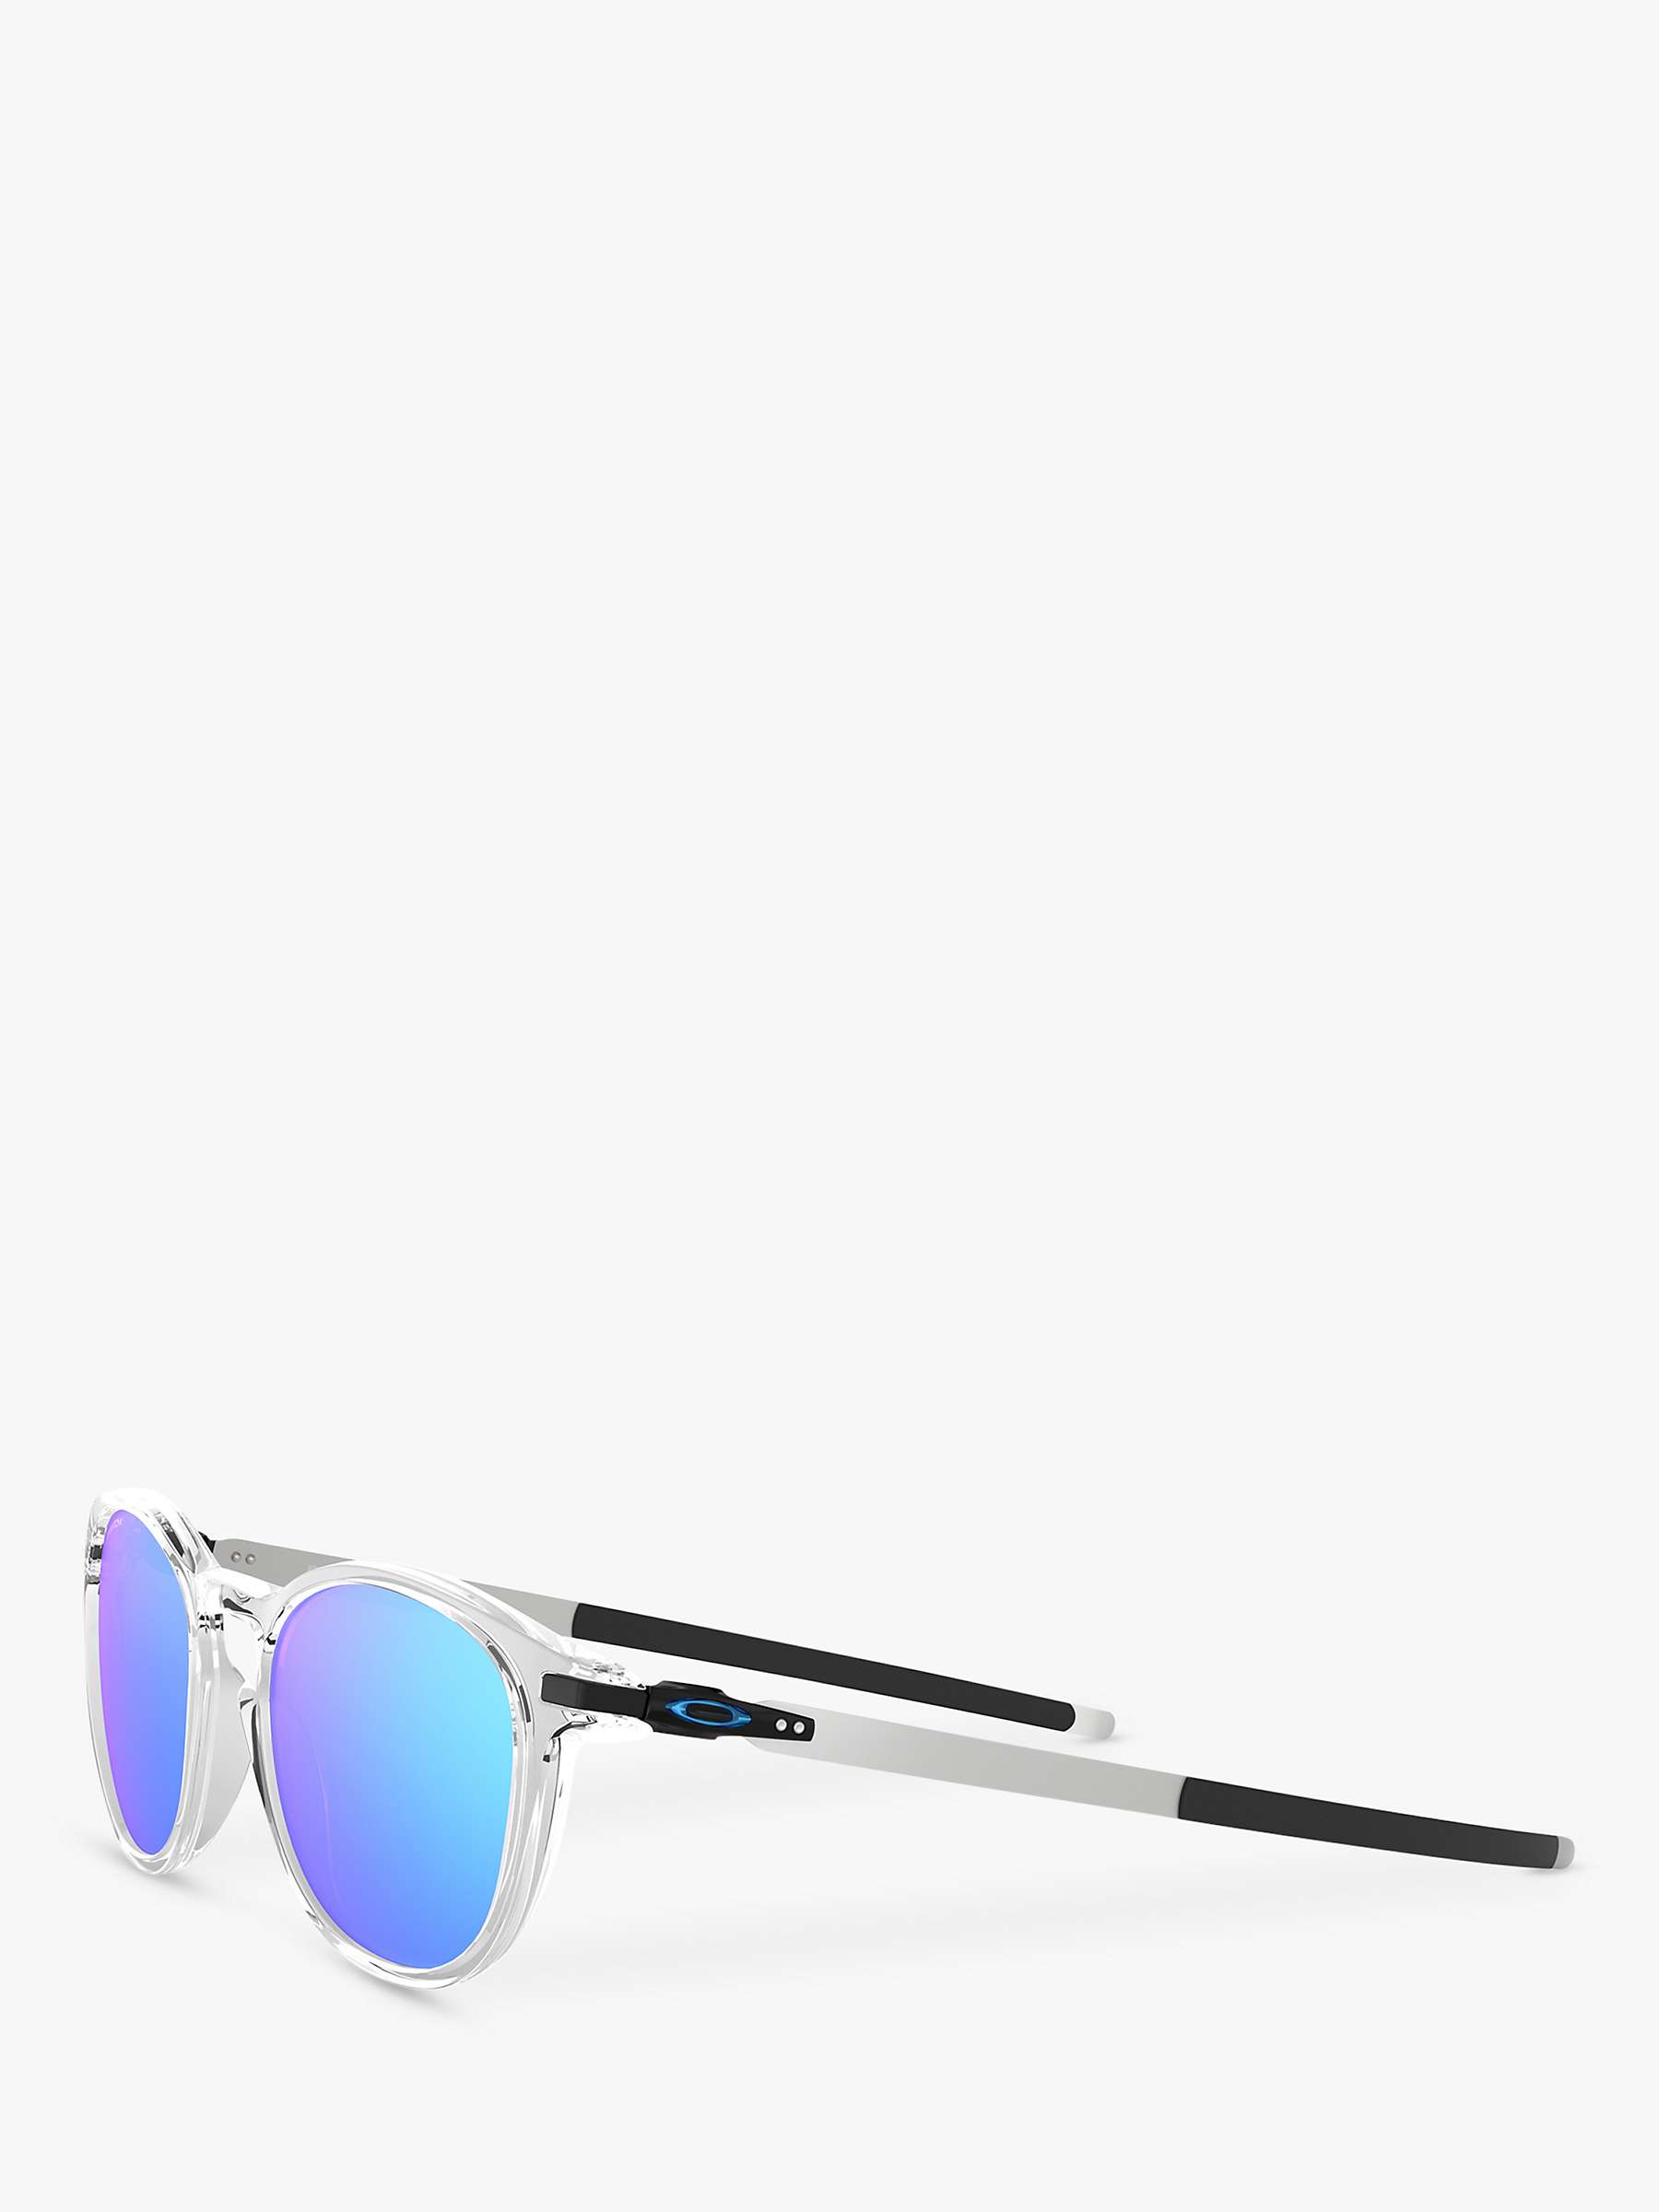 Buy Oakley OO9439 Men's Pitchman R Prizm Round Sunglasses Online at johnlewis.com